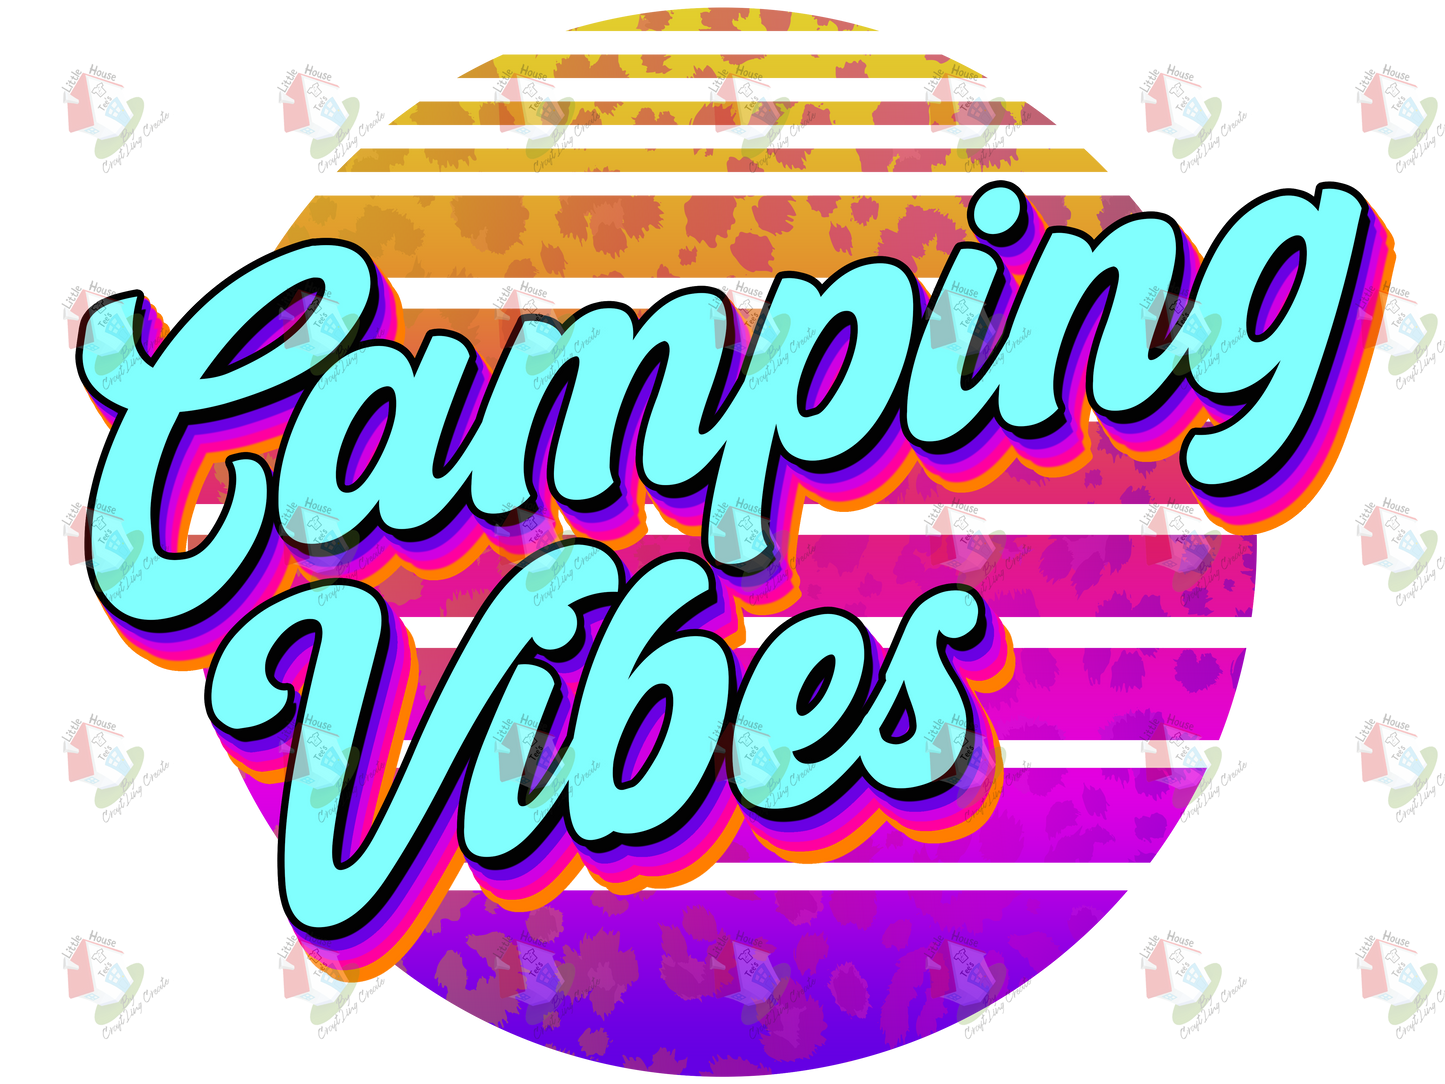 6973 Camping Vibes retro  - DTF